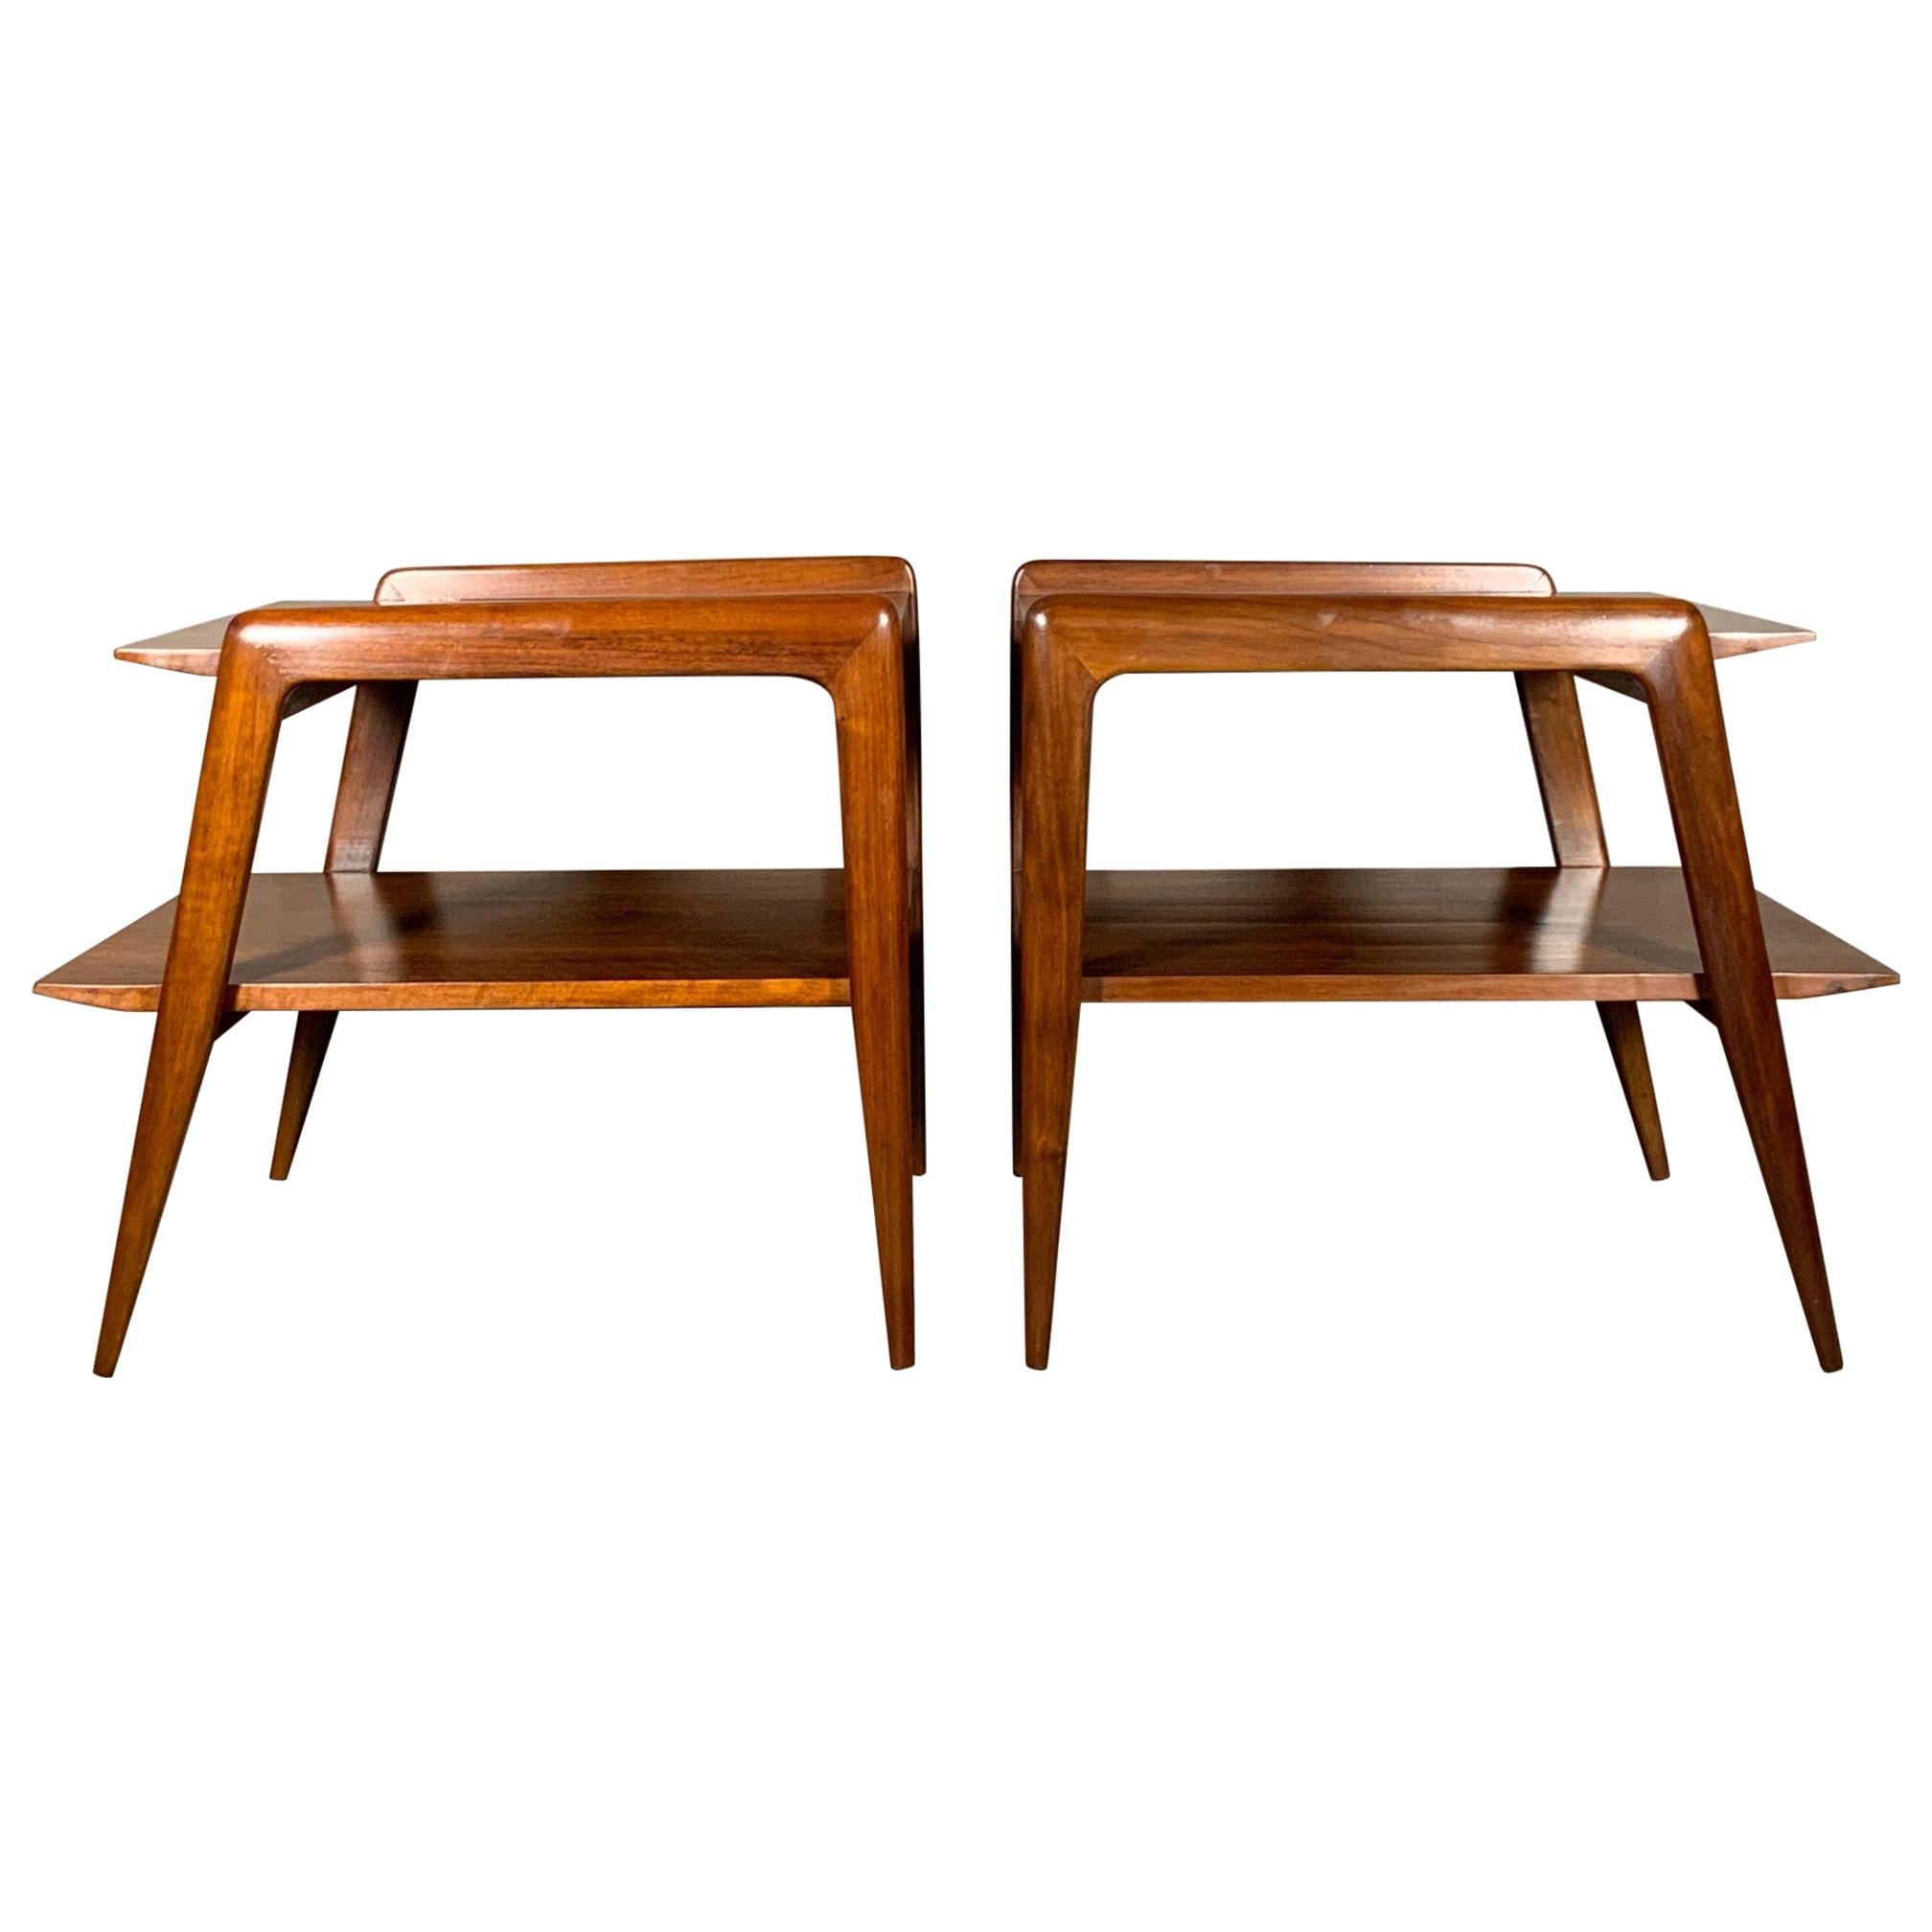 Pair of Gio Ponti Side Tables in Walnut